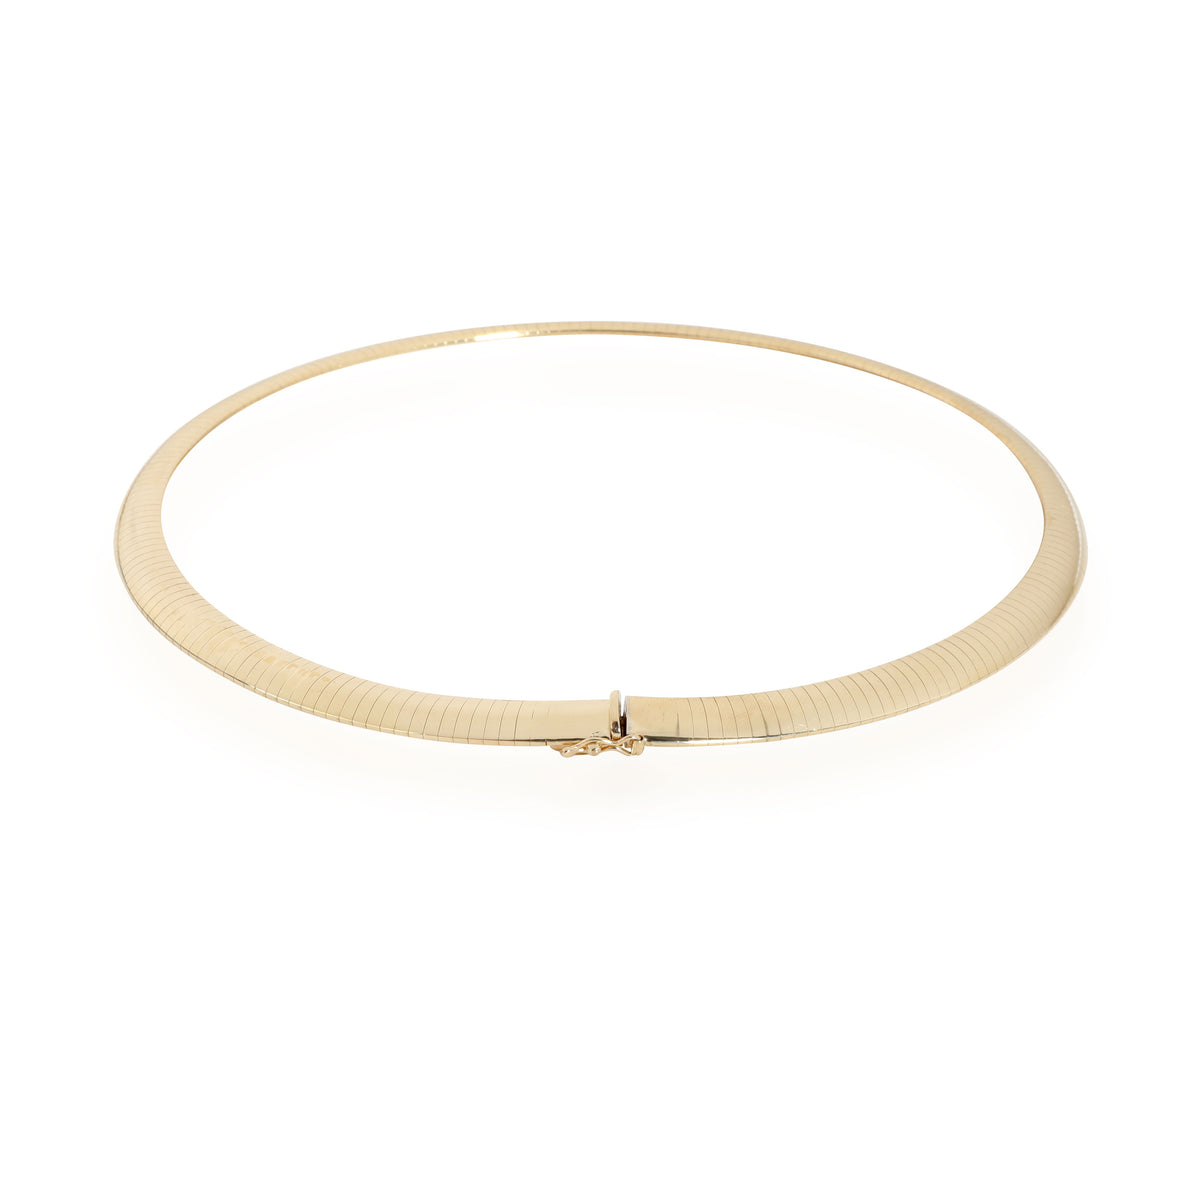 Vintage Omega-Style Choker Necklace in 14K Yellow Gold